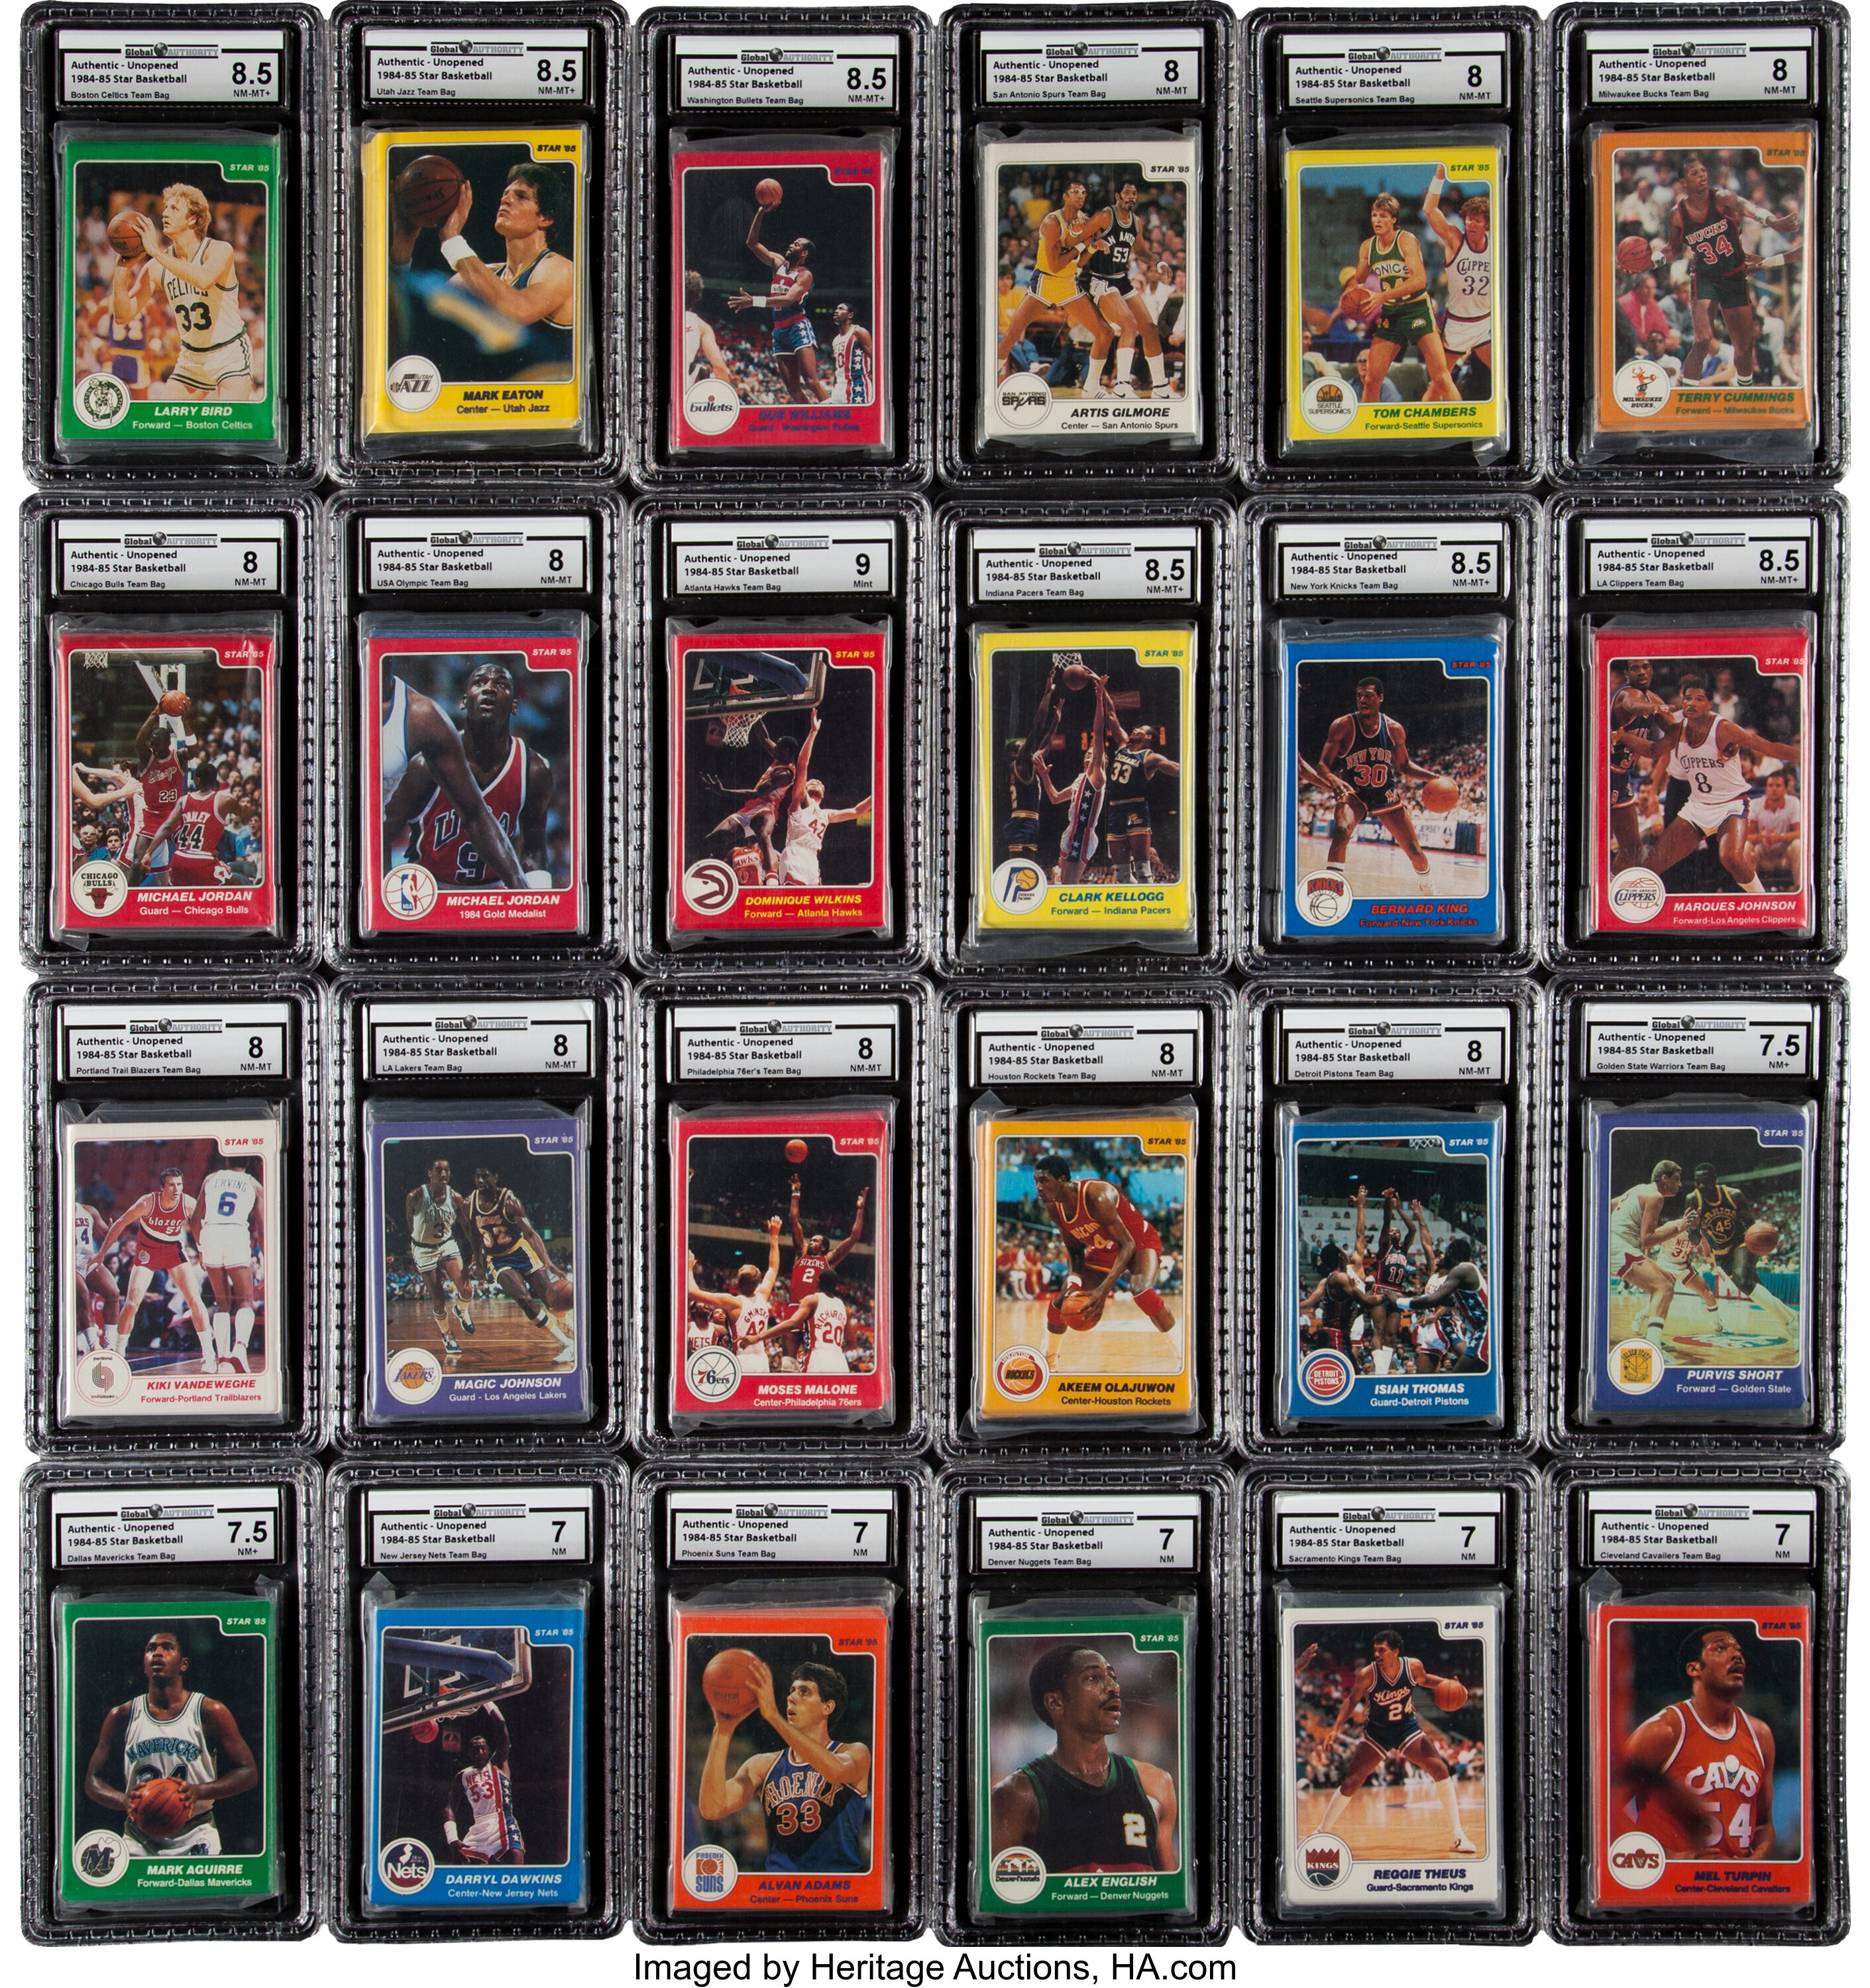 Sold at Auction: 1984 Star Basketball Detroit Pistons Team Set